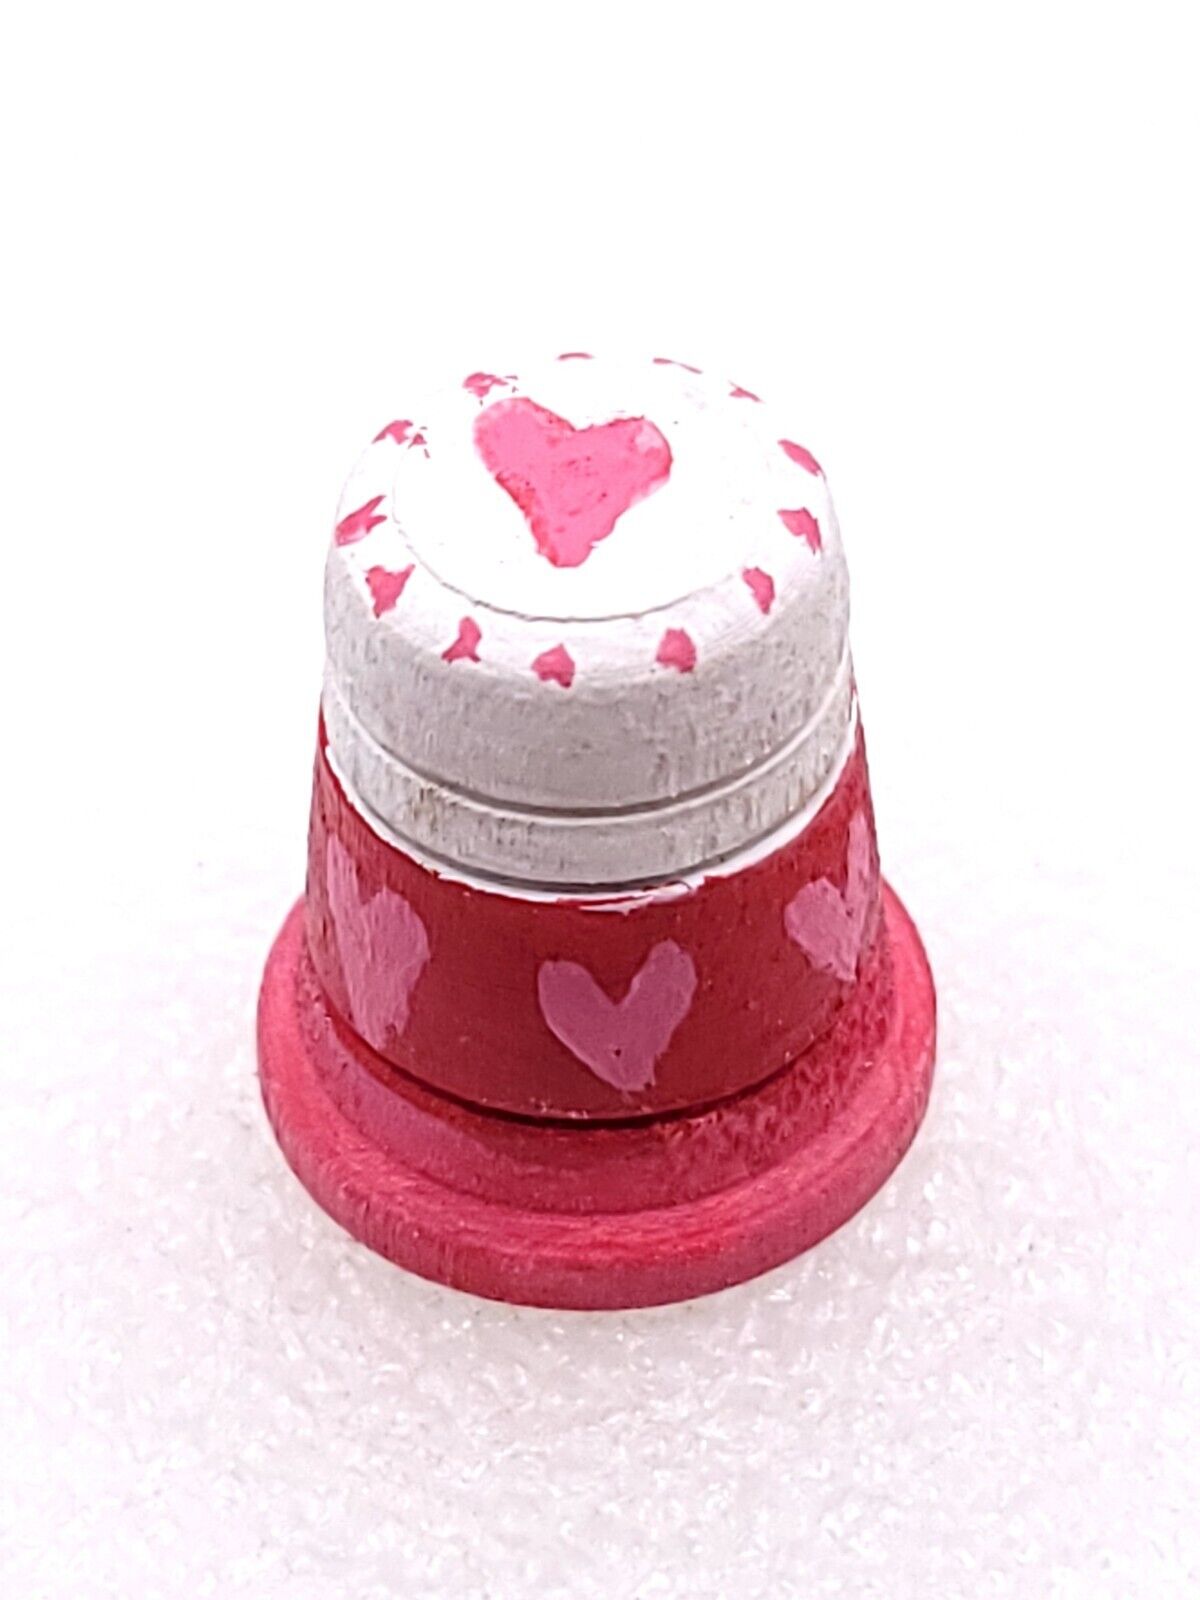 VTG Hand Painted Pink Red White Hearts Wooden wood Thimble